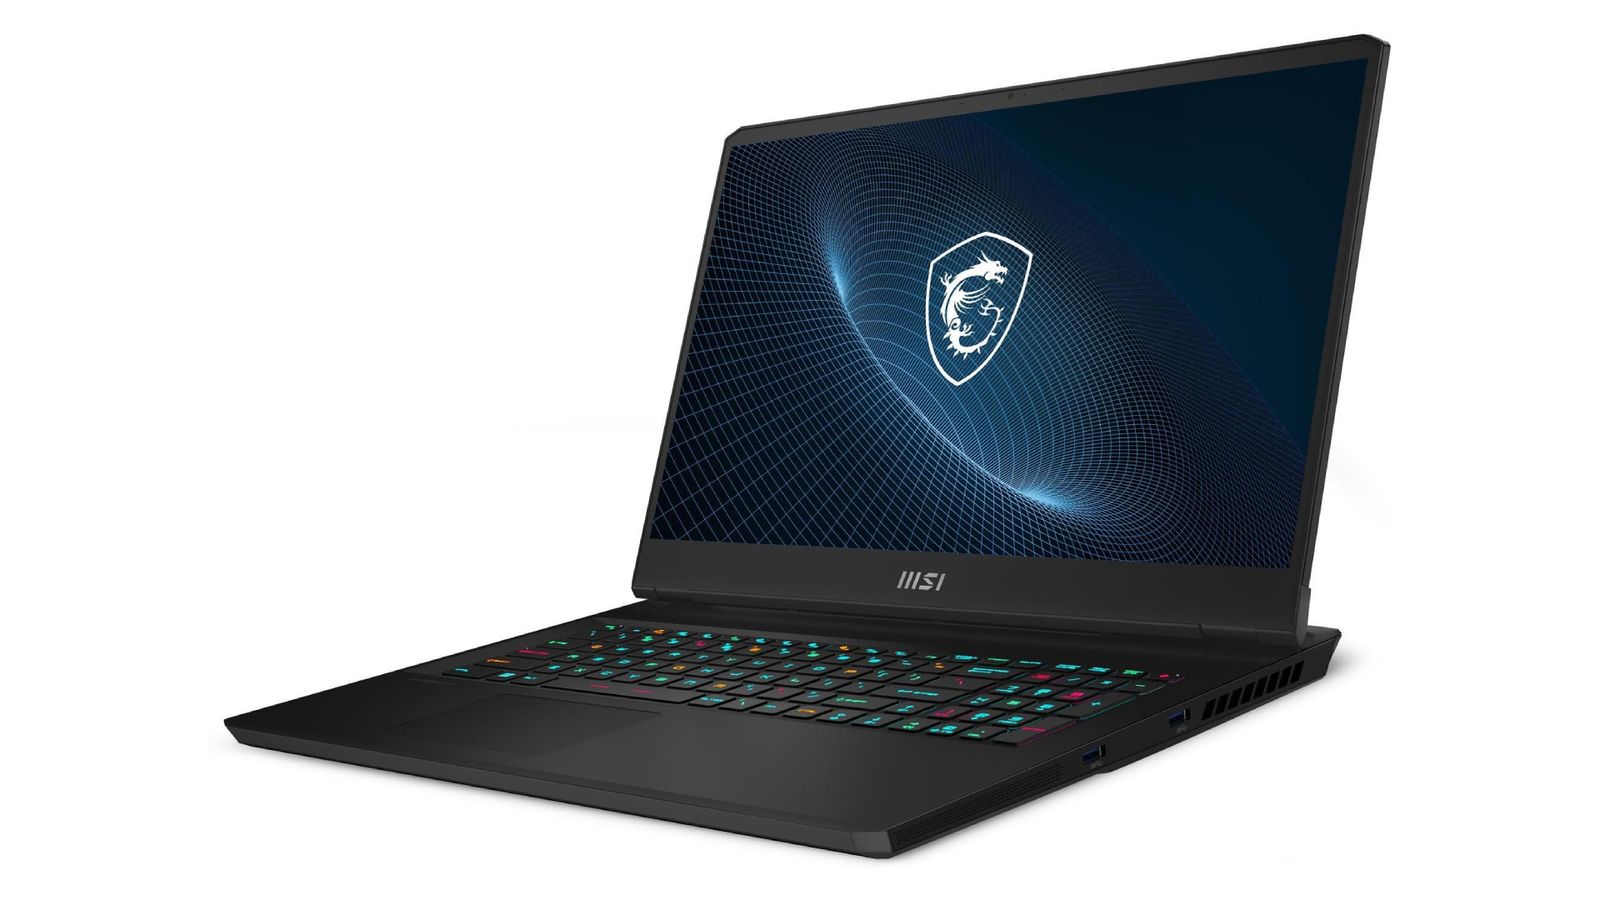 Best Starfield gaming laptop - MSI Vector GP76 product image of a black gaming laptop featuring blue, green, red, and orange backlit keys.